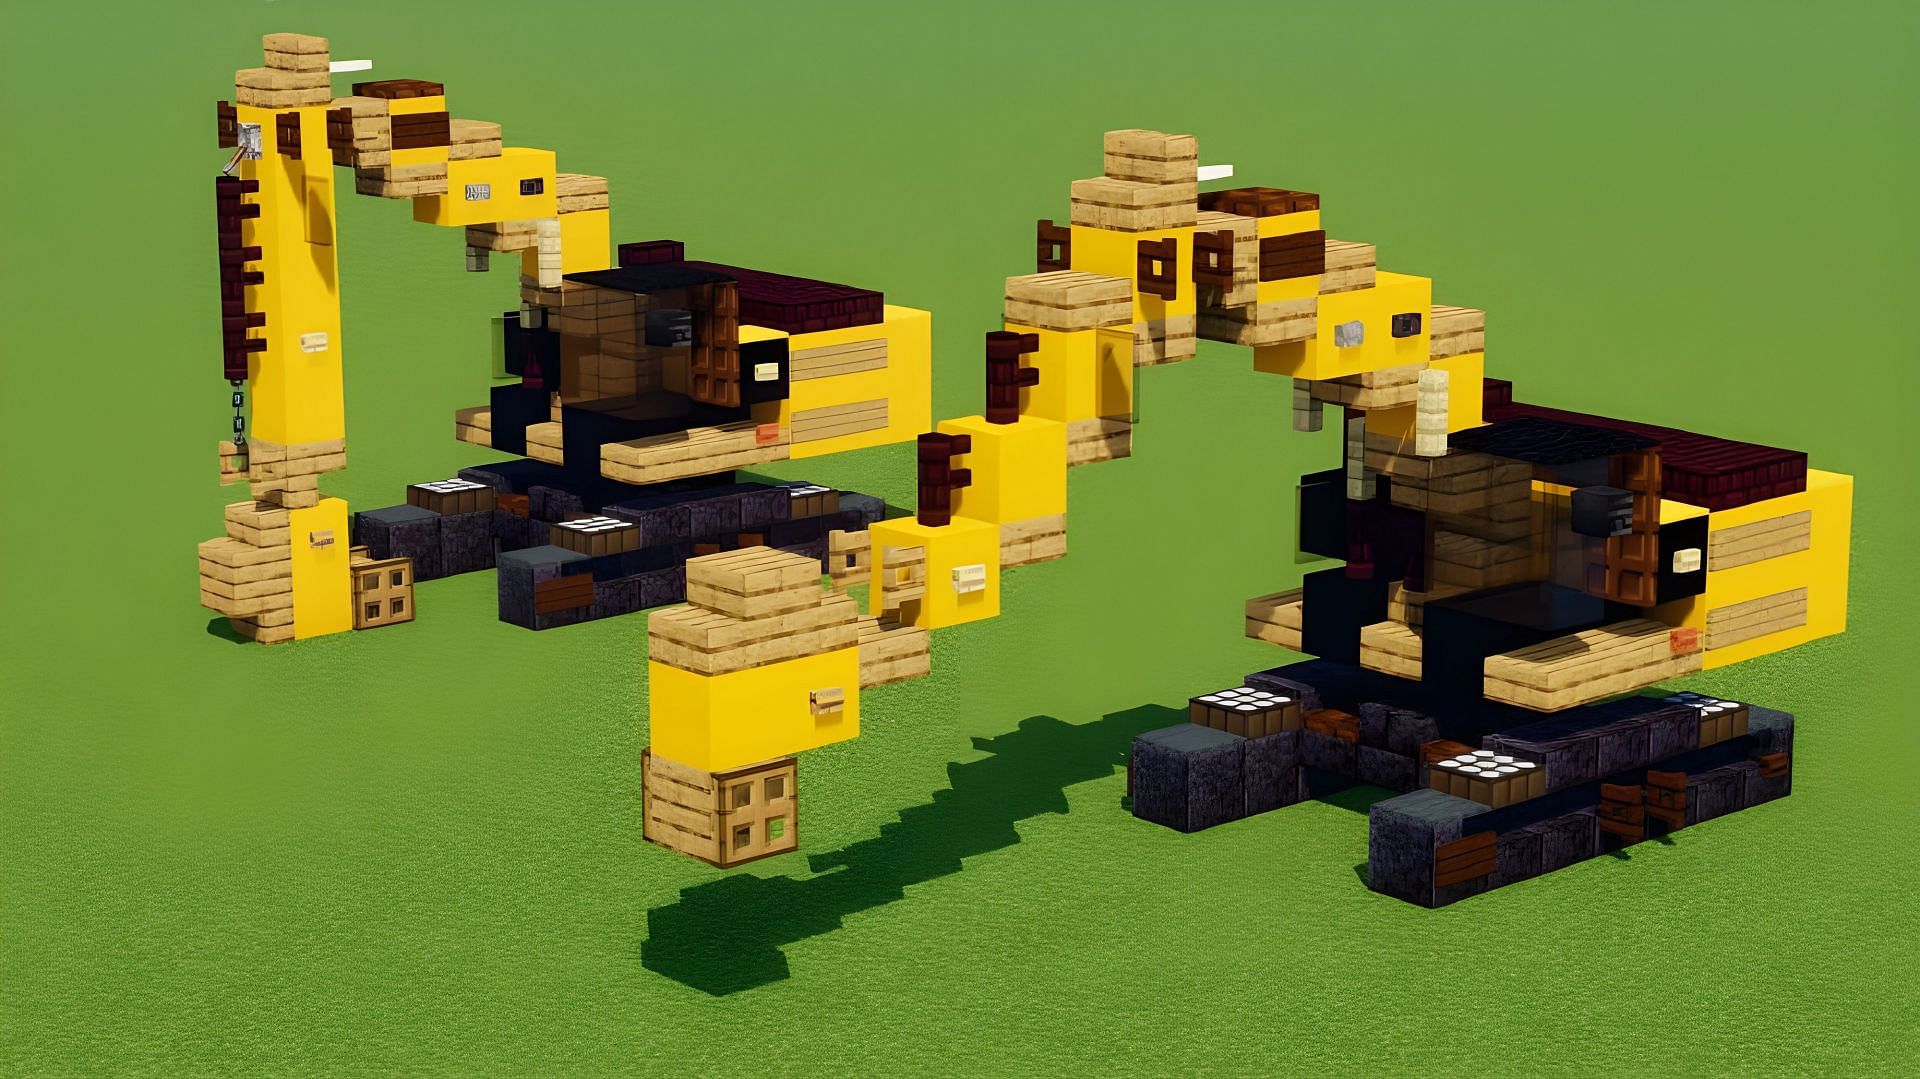 Construction vehicles make for incredible Minecraft builds (Image via Youtube/CraftyFoxeMC)